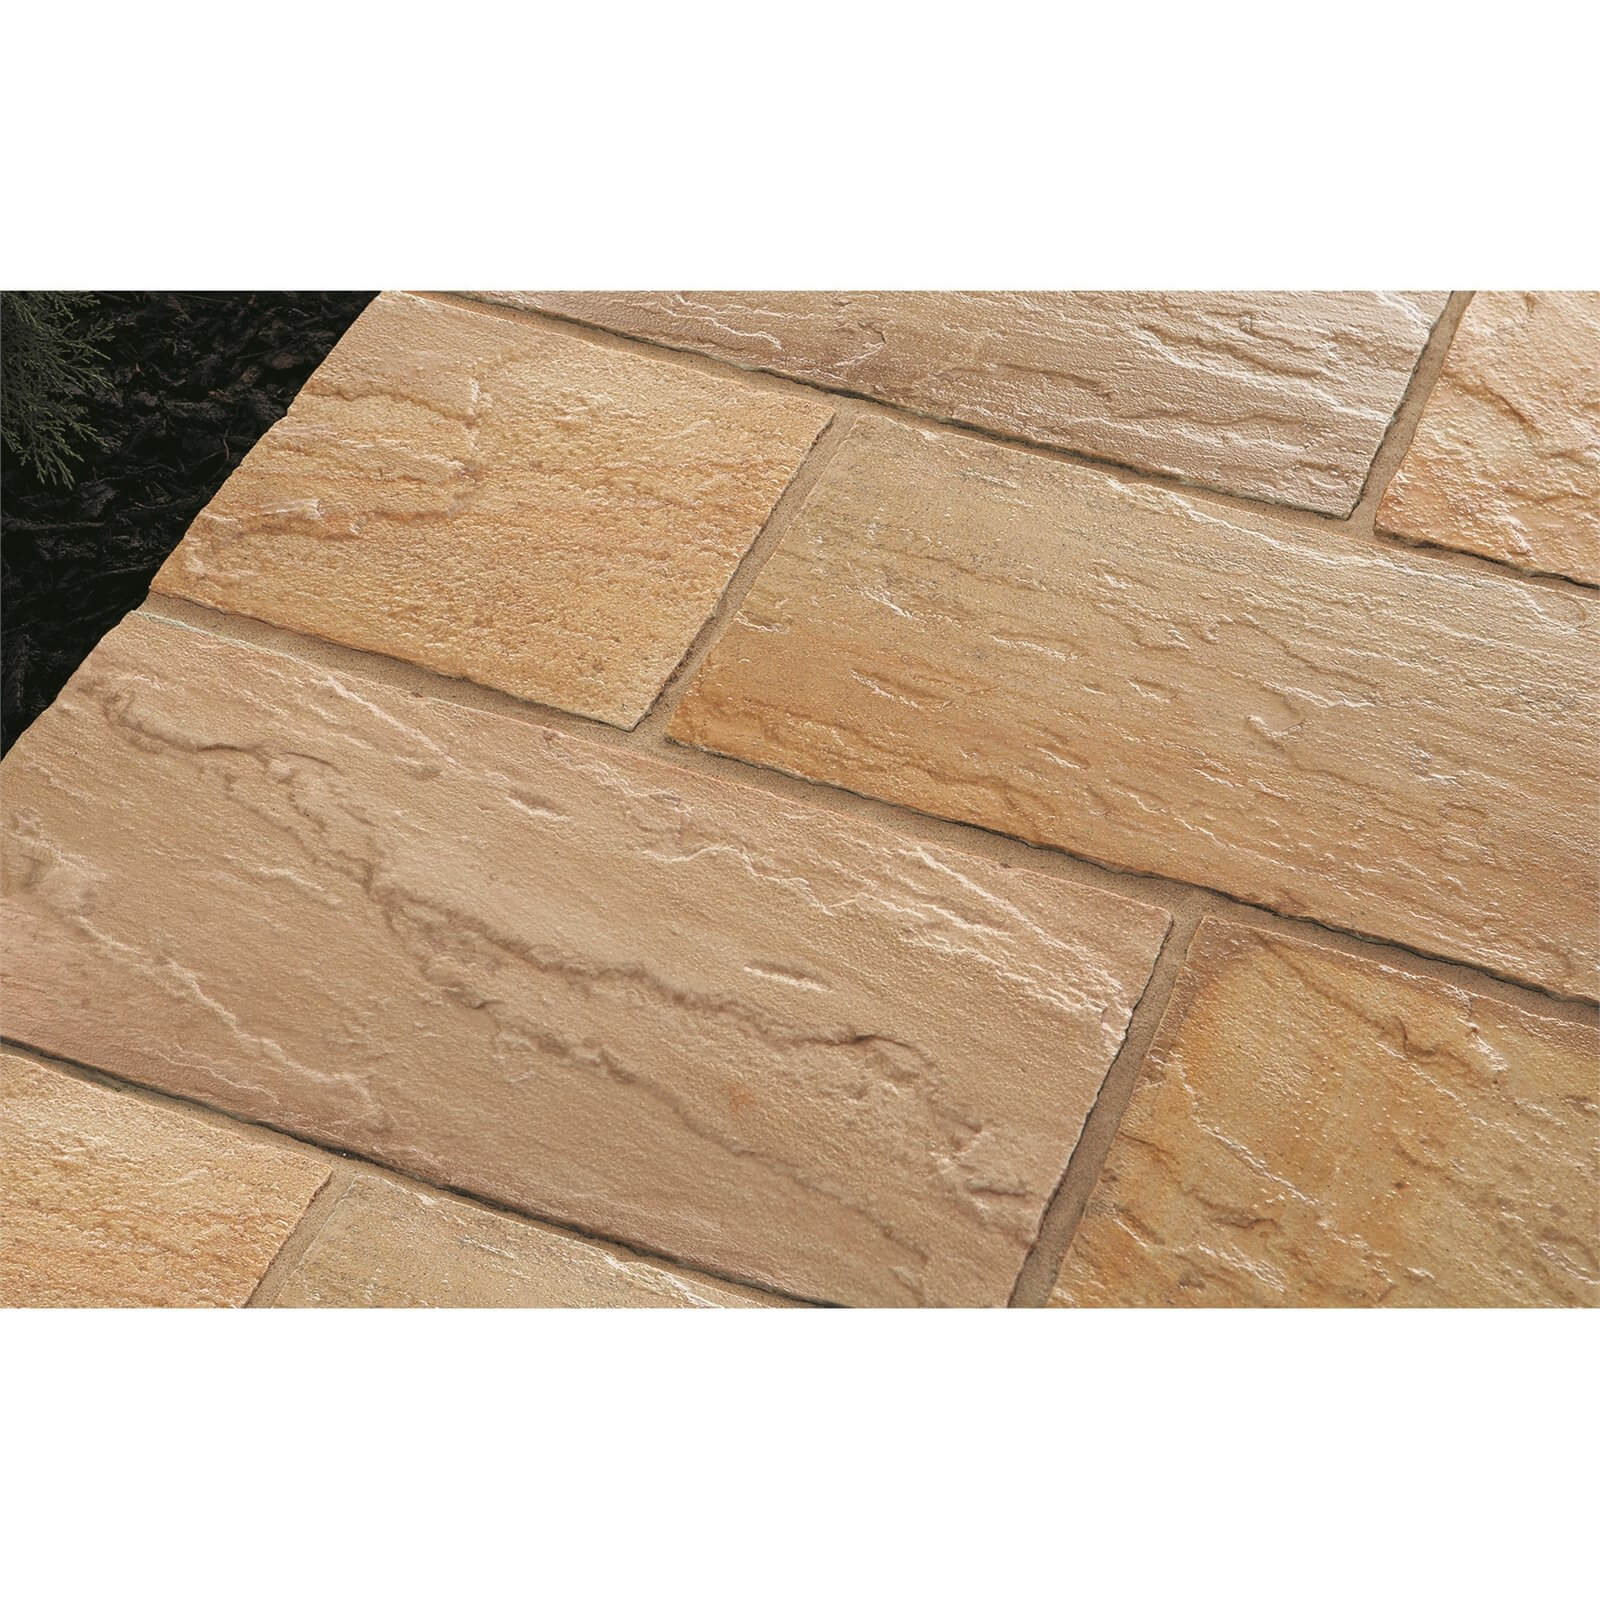 Thompson's Patio And Block Paving Seal - Wet Look Finish - 5L